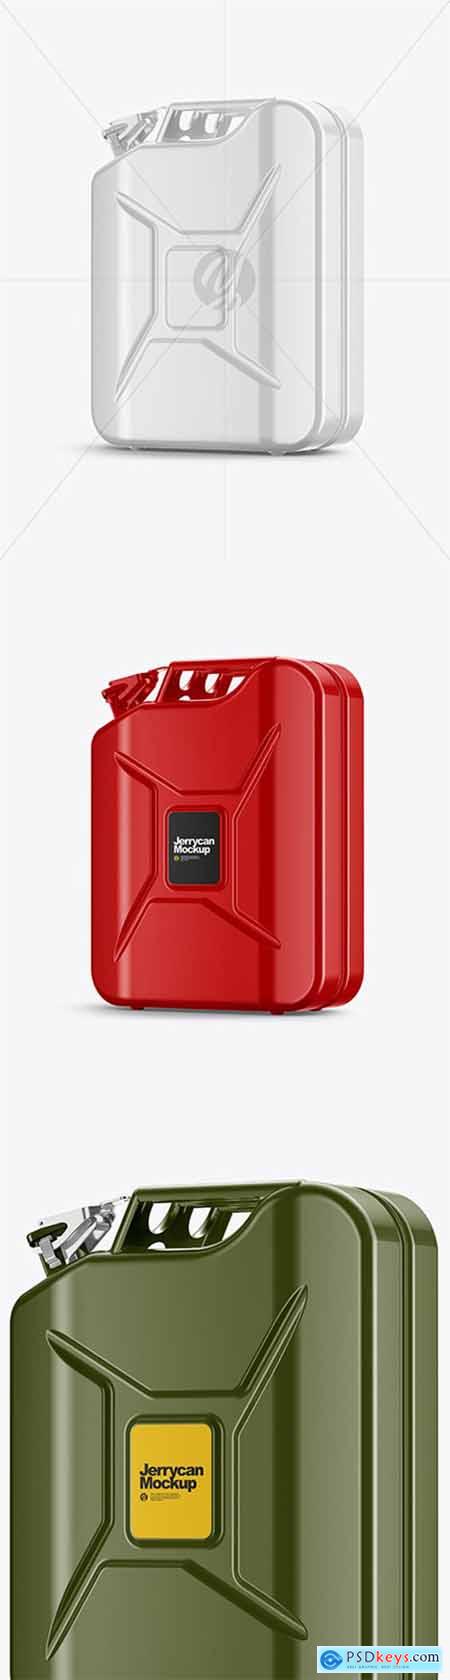 Fuel Jerrycan - Half Side View 79757